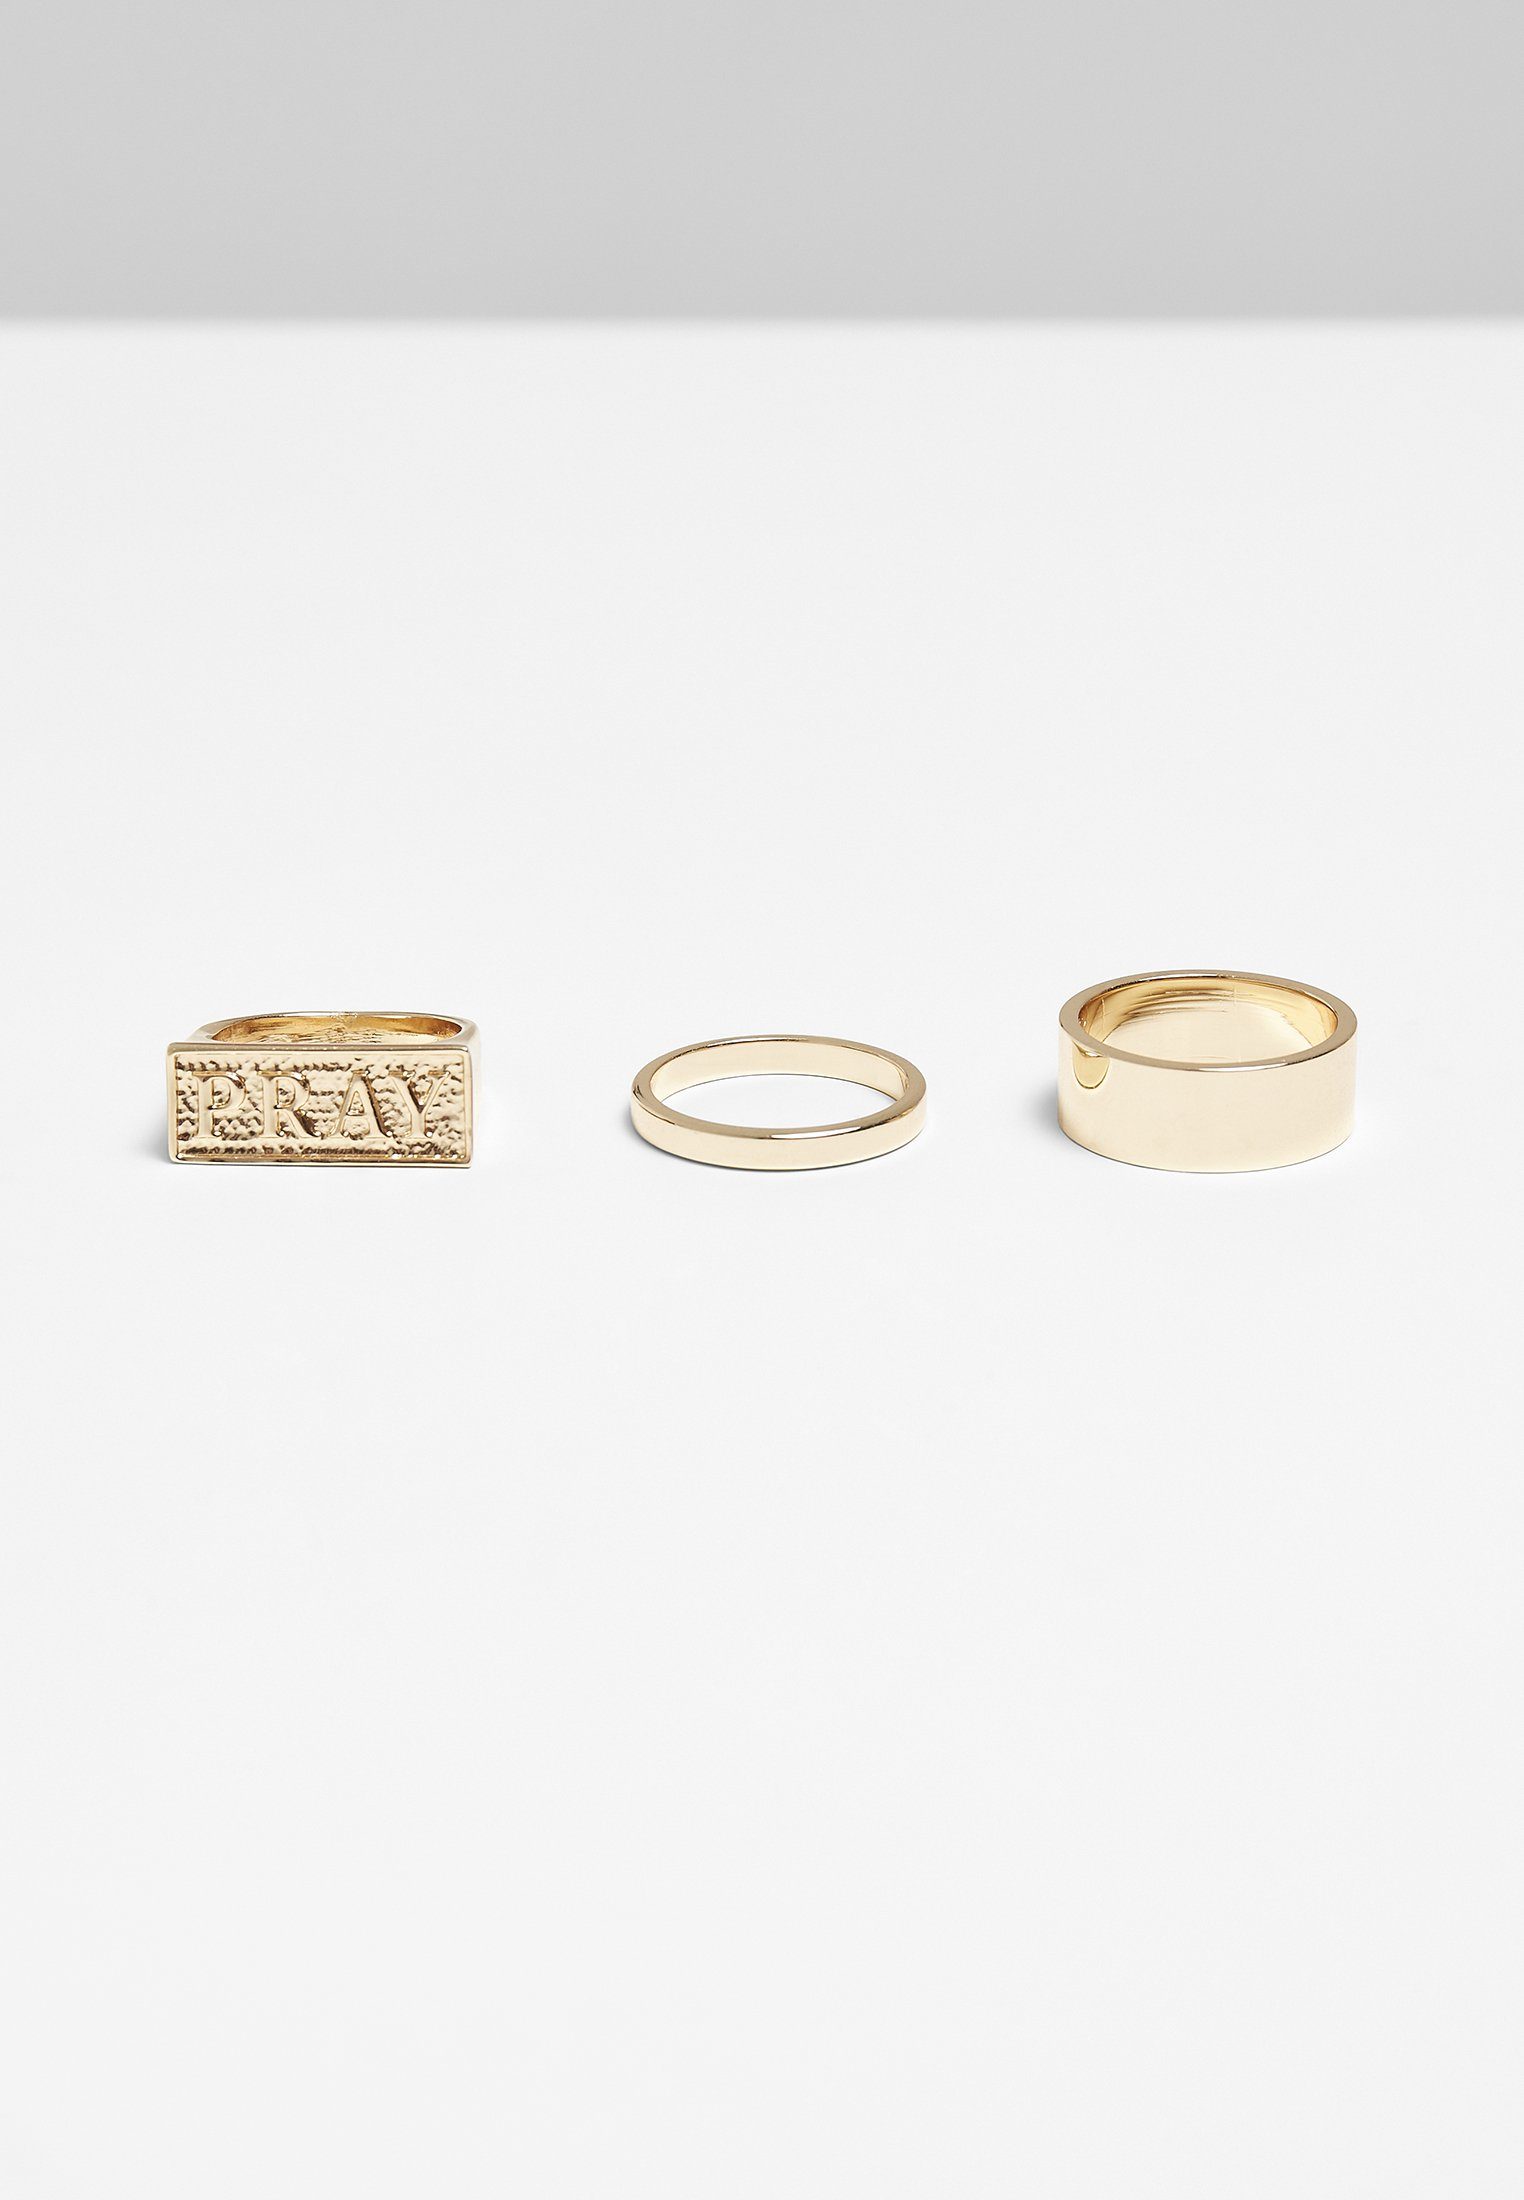 Mister Tee MisterTee Accessories Pray Ring-Set gold Set Ring